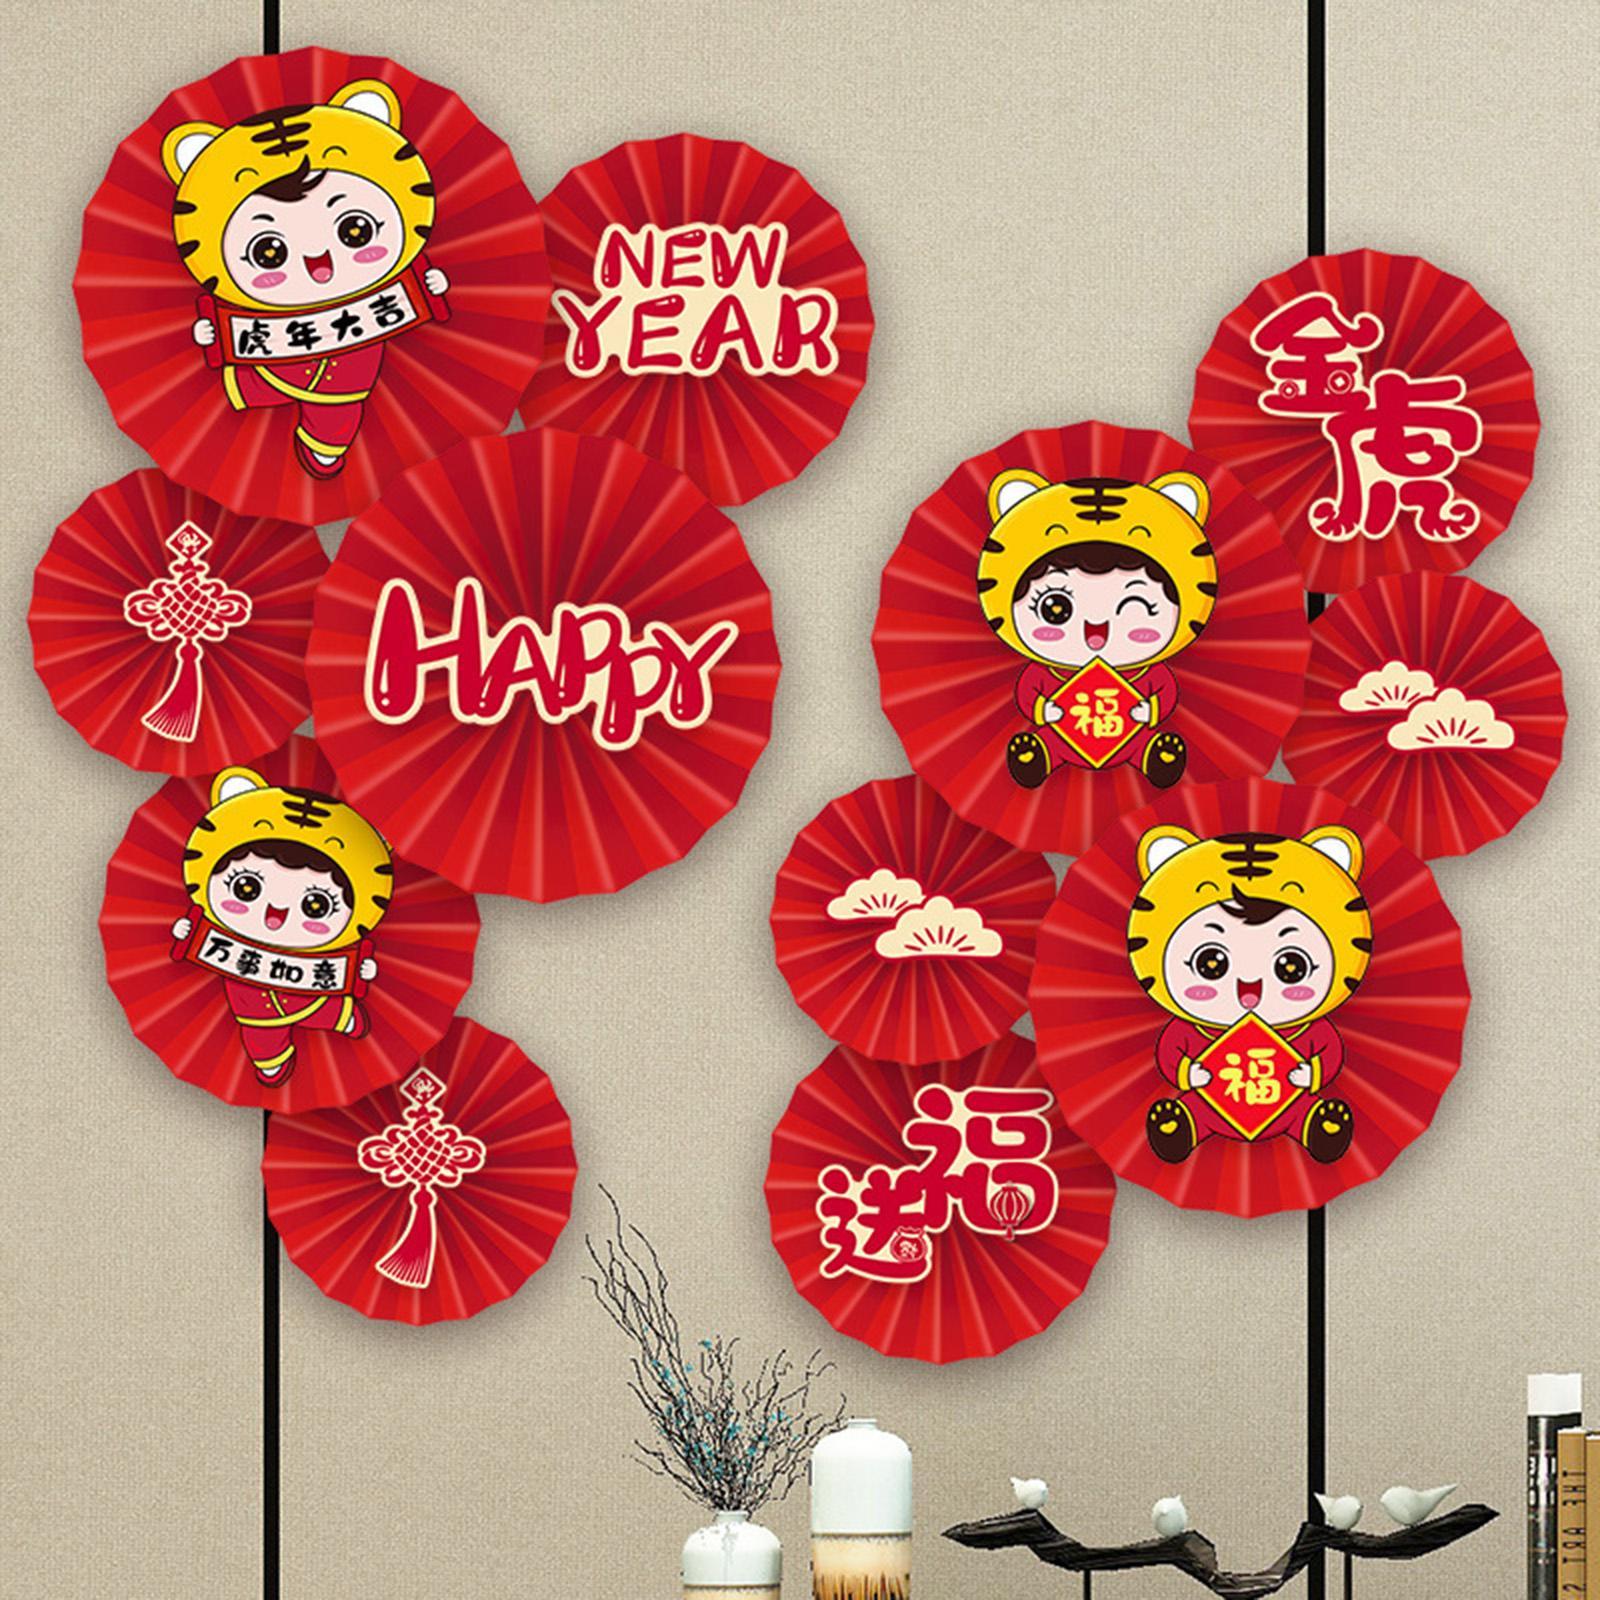 18x New Year Hanging Paper Fans Birthday Party Flowers Wedding Decor Striped